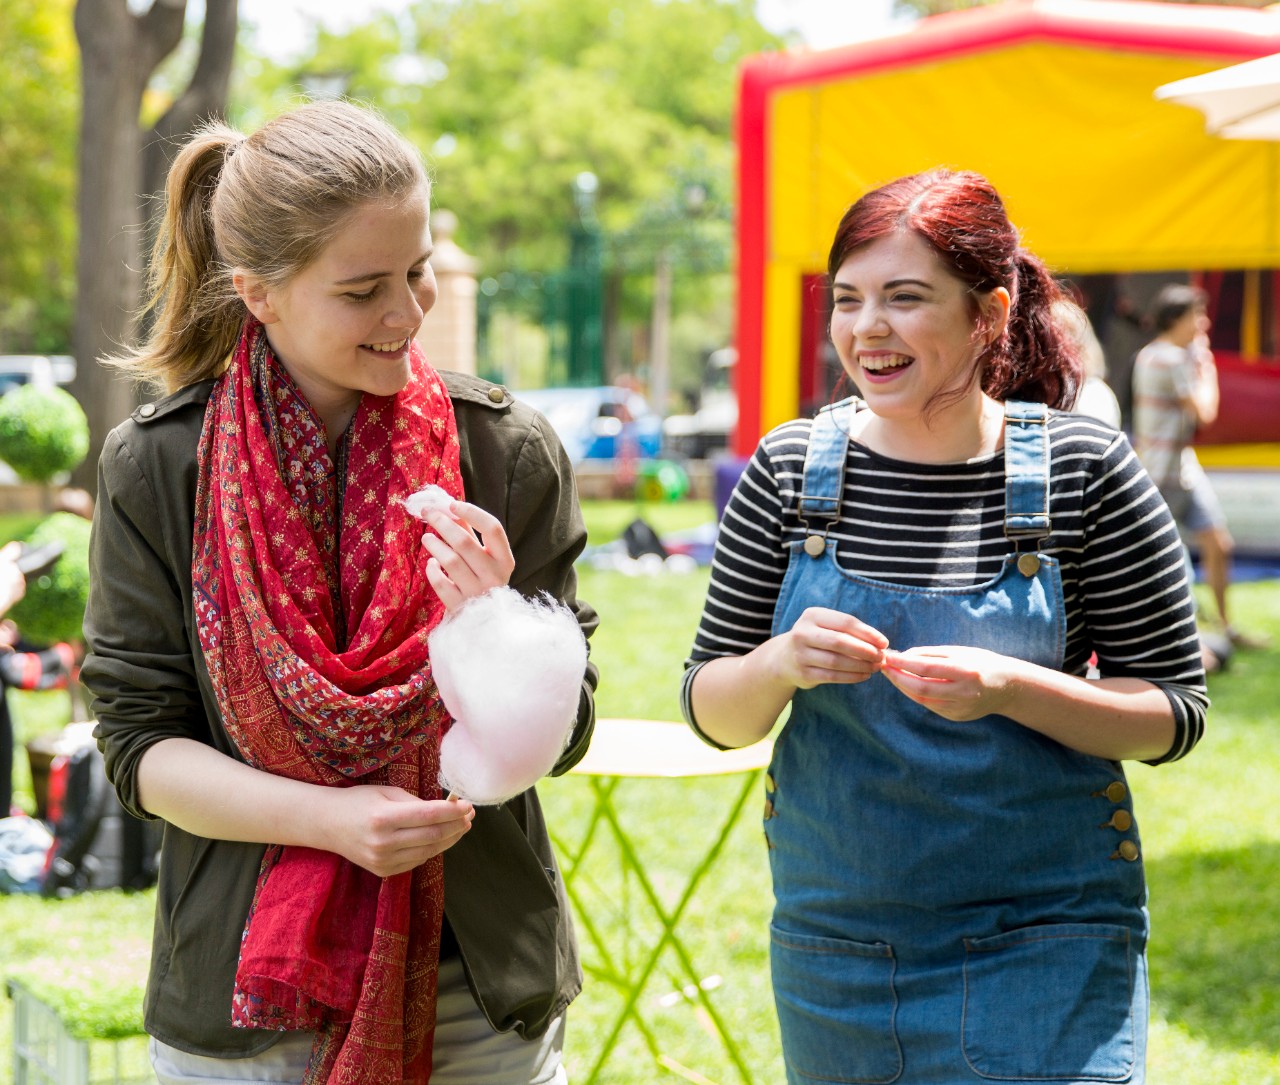 Student Union Stress Less event on Barr Smith Lawns. Fairy floss